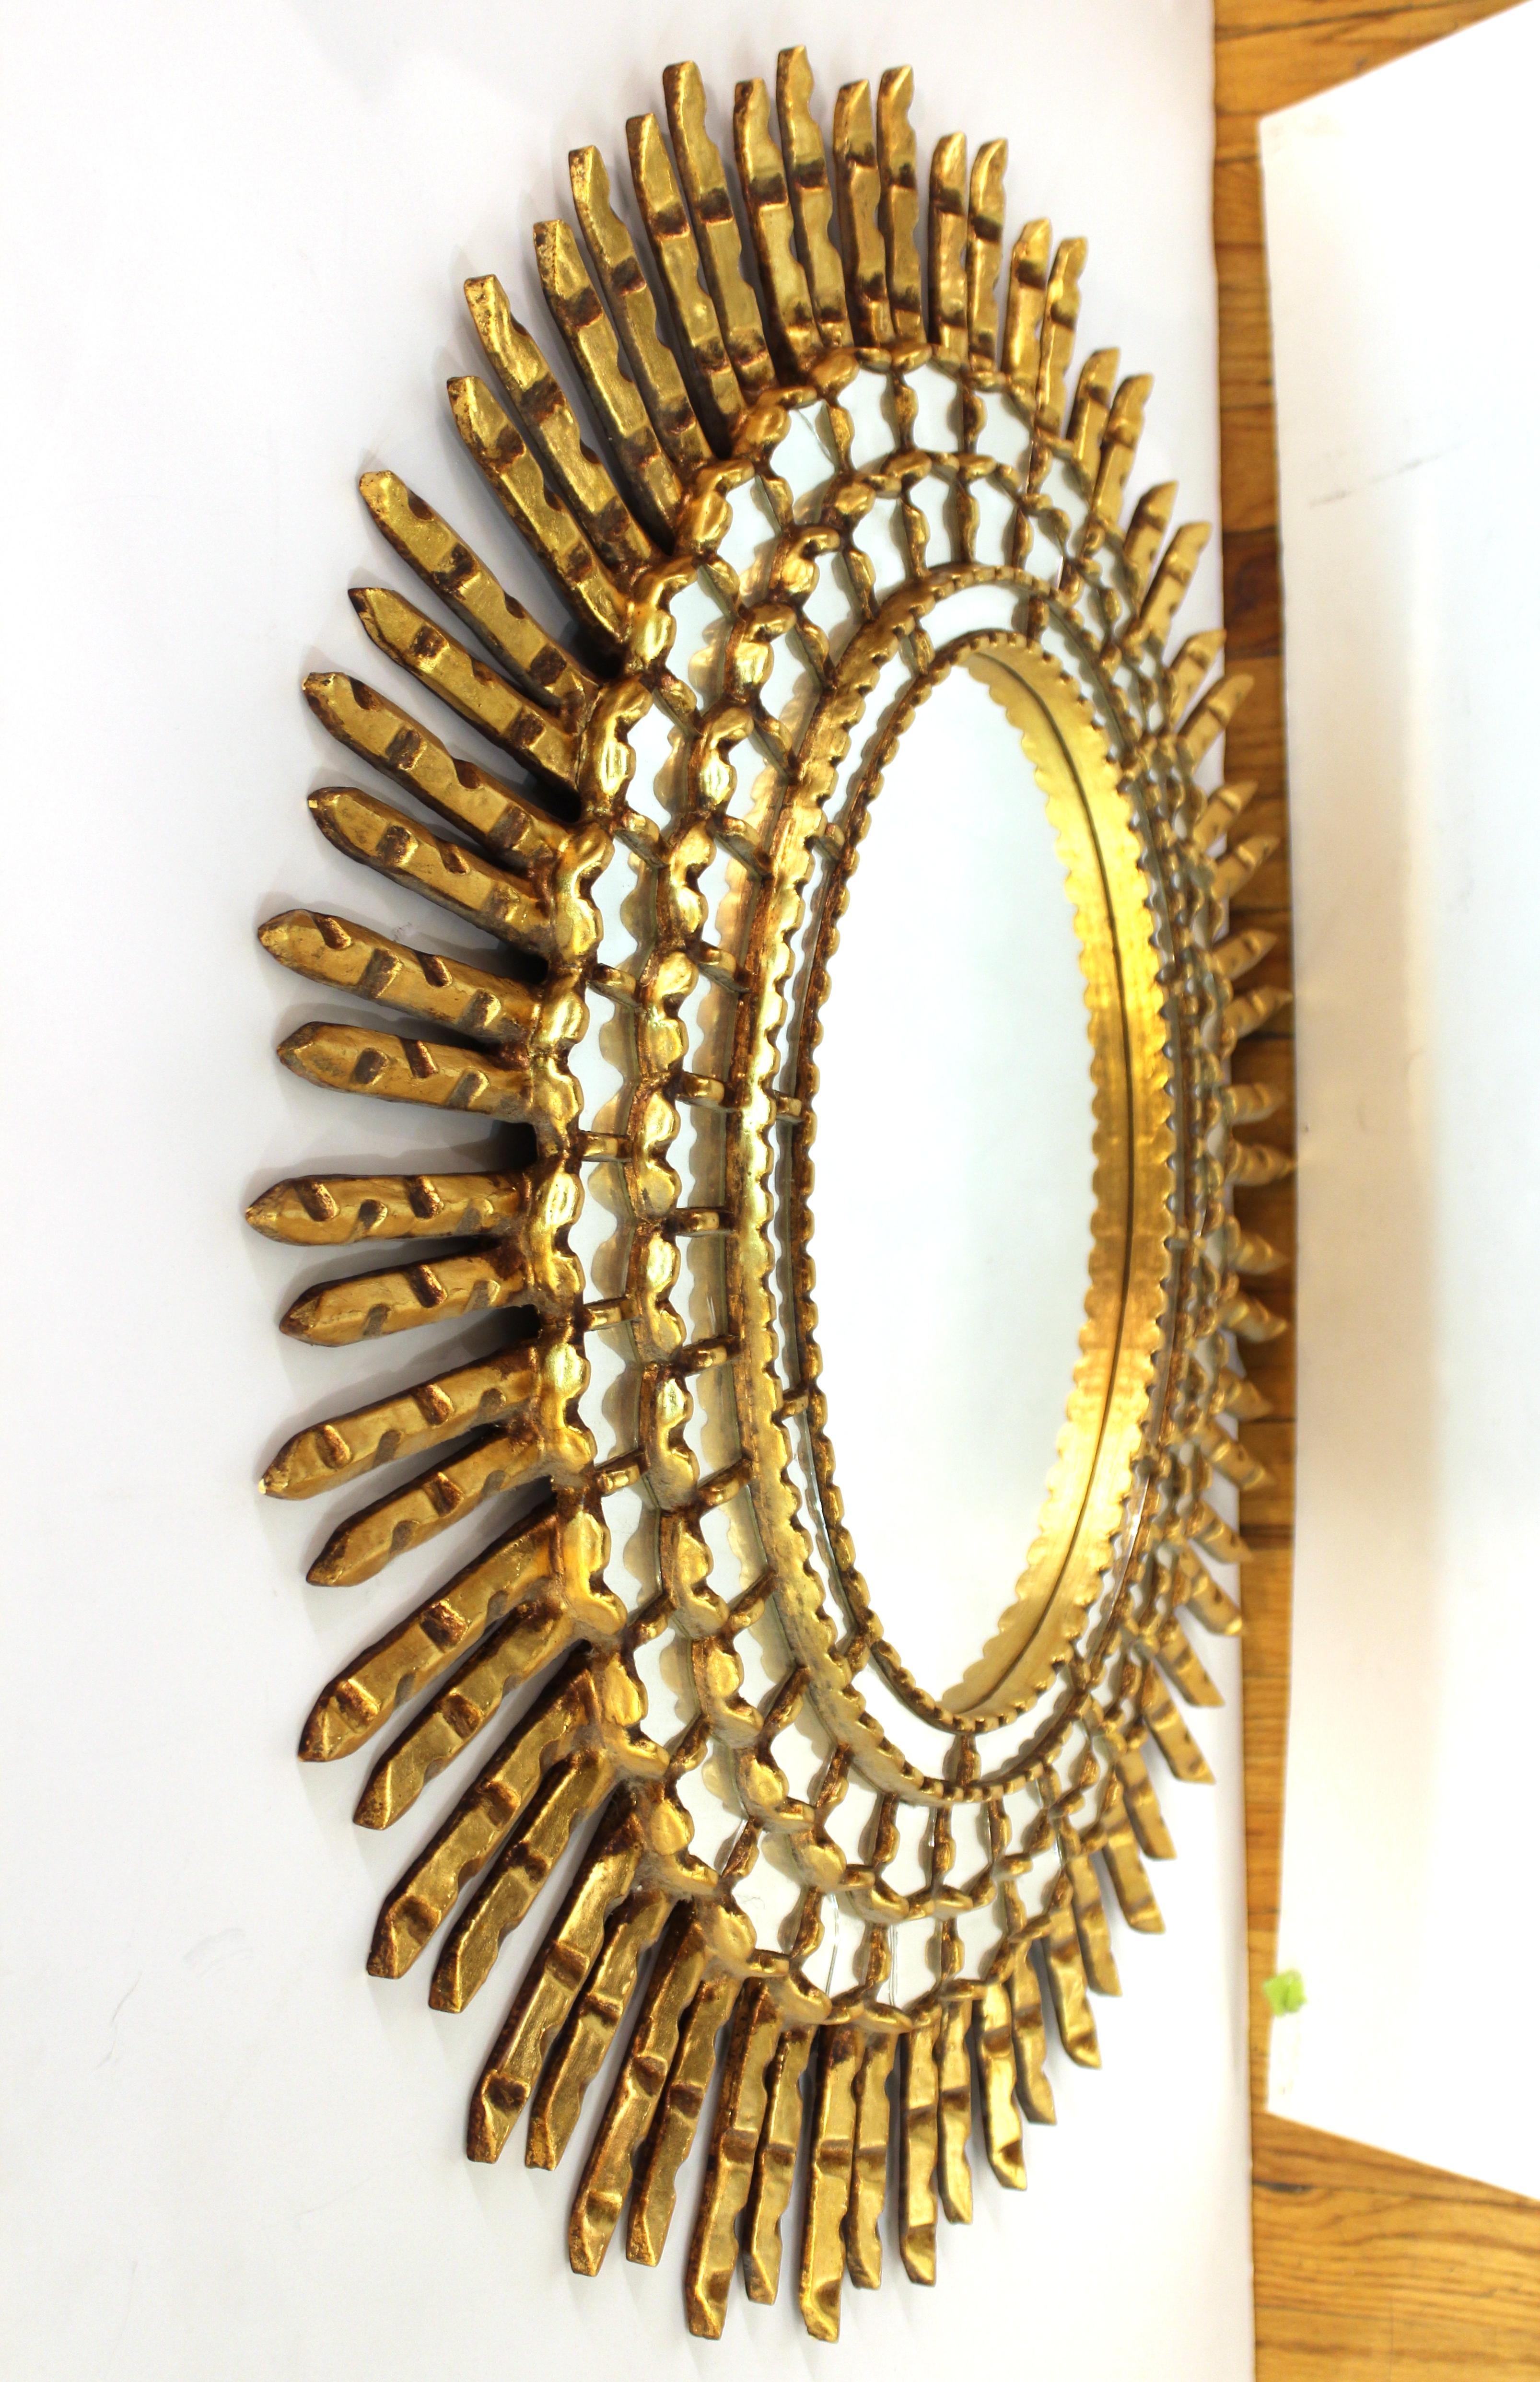 Mid-Century Modern oval shaped sunburst wall mirror. The piece is made of giltwood with inserted concentric circles of mirrored elements and wooden rays. In great vintage condition with age-appropriate wear and some minor cracks in the smaller